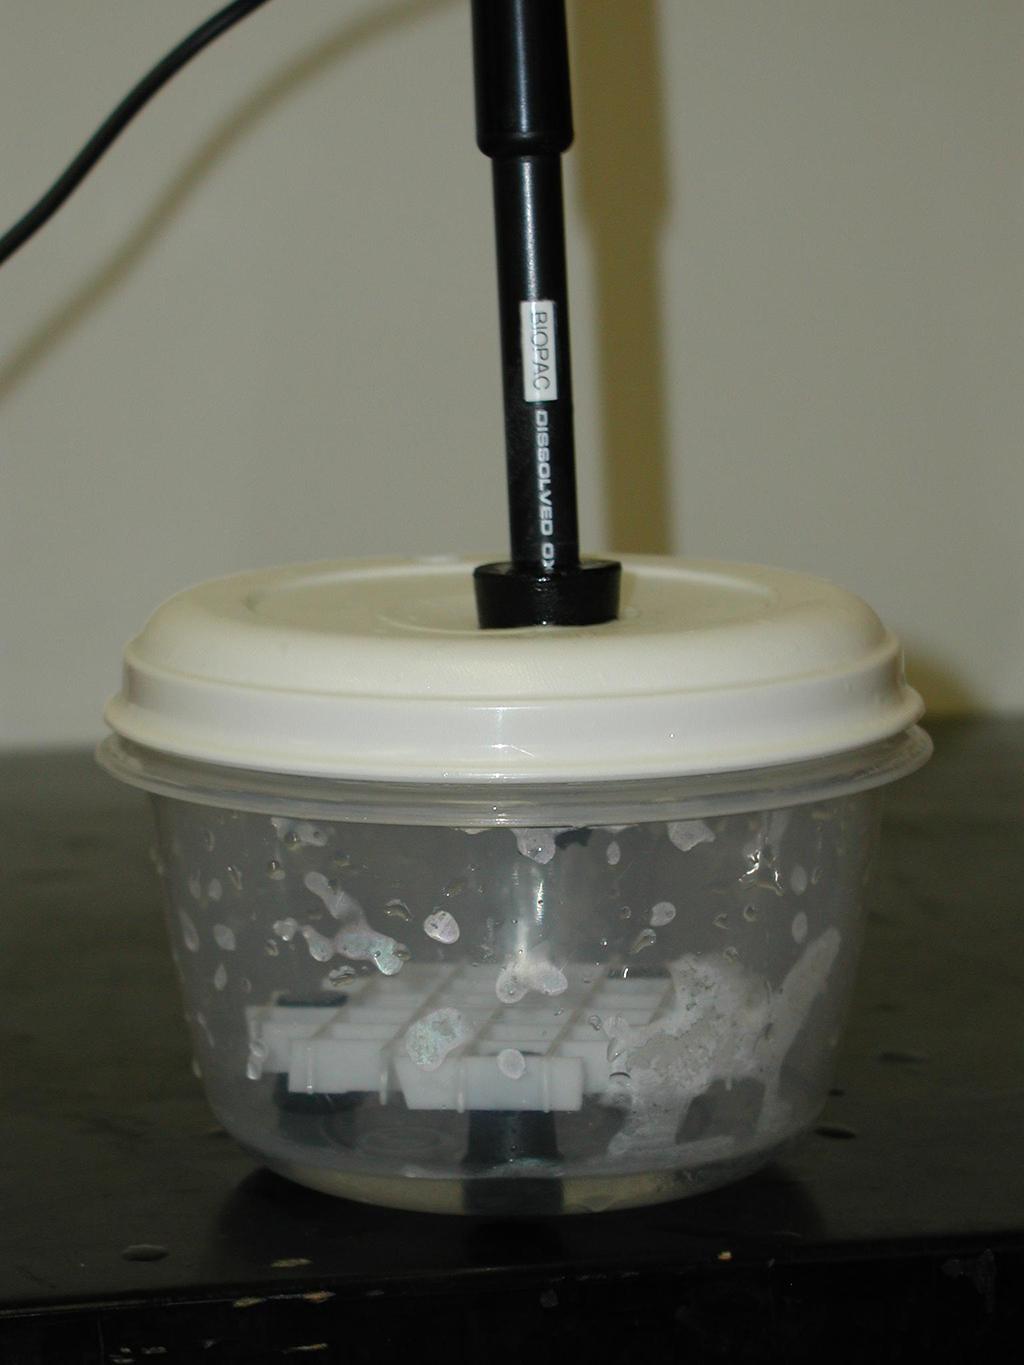 water, but not overly exercise or stress the fish (i.e., no whirpools!). A false bottom made from plastic grate mounted on rubber stopper "feet" keeps the fish from being beaten-up by the stir bar.